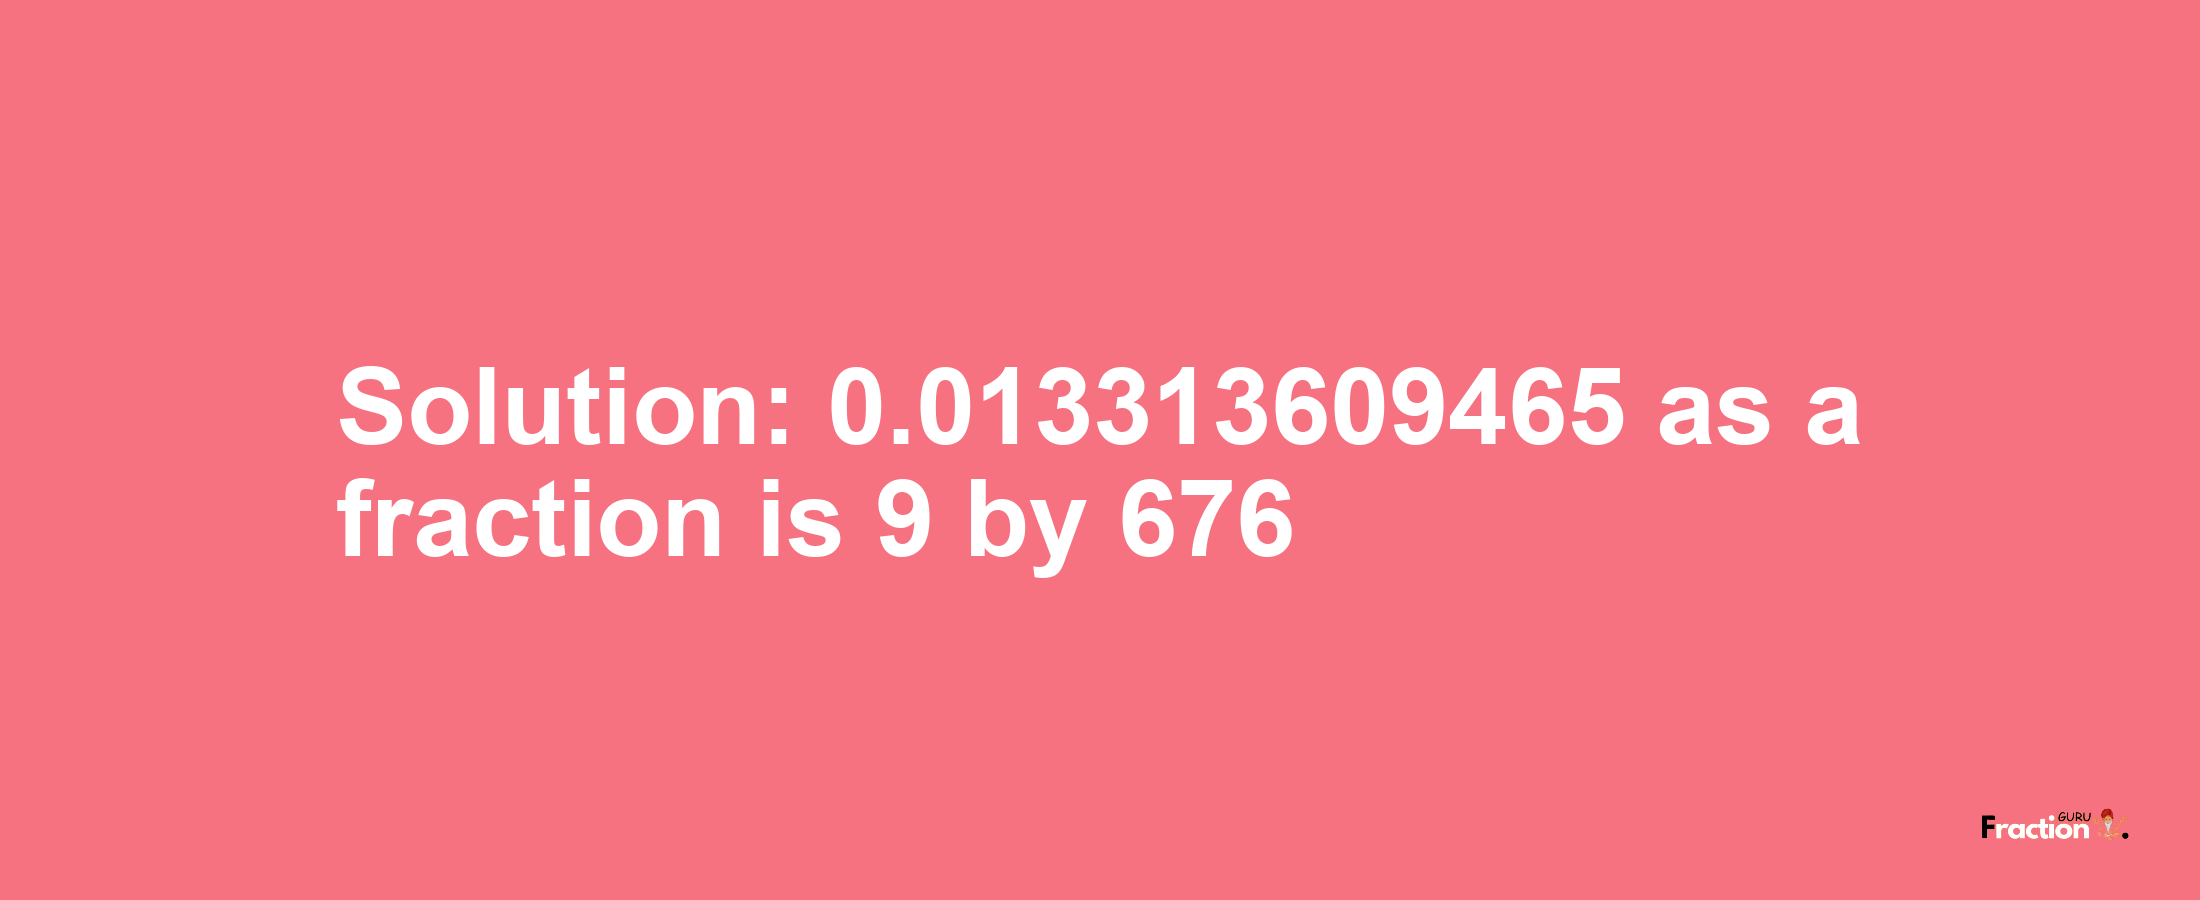 Solution:0.013313609465 as a fraction is 9/676